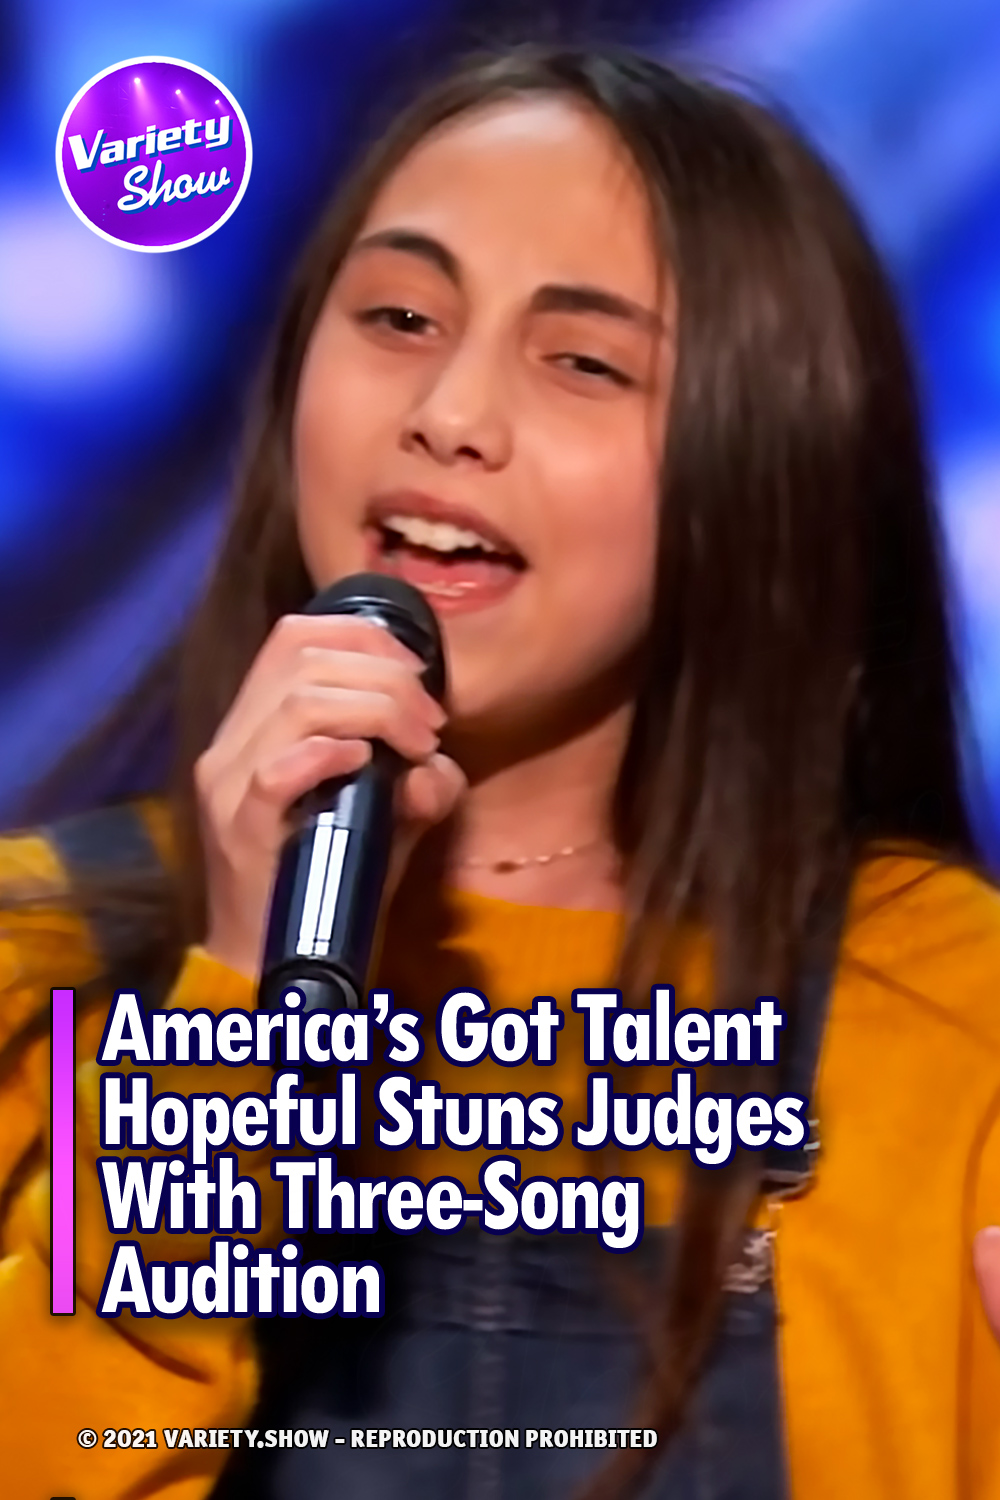 America’s Got Talent Hopeful Stuns Judges With Three-Song Audition